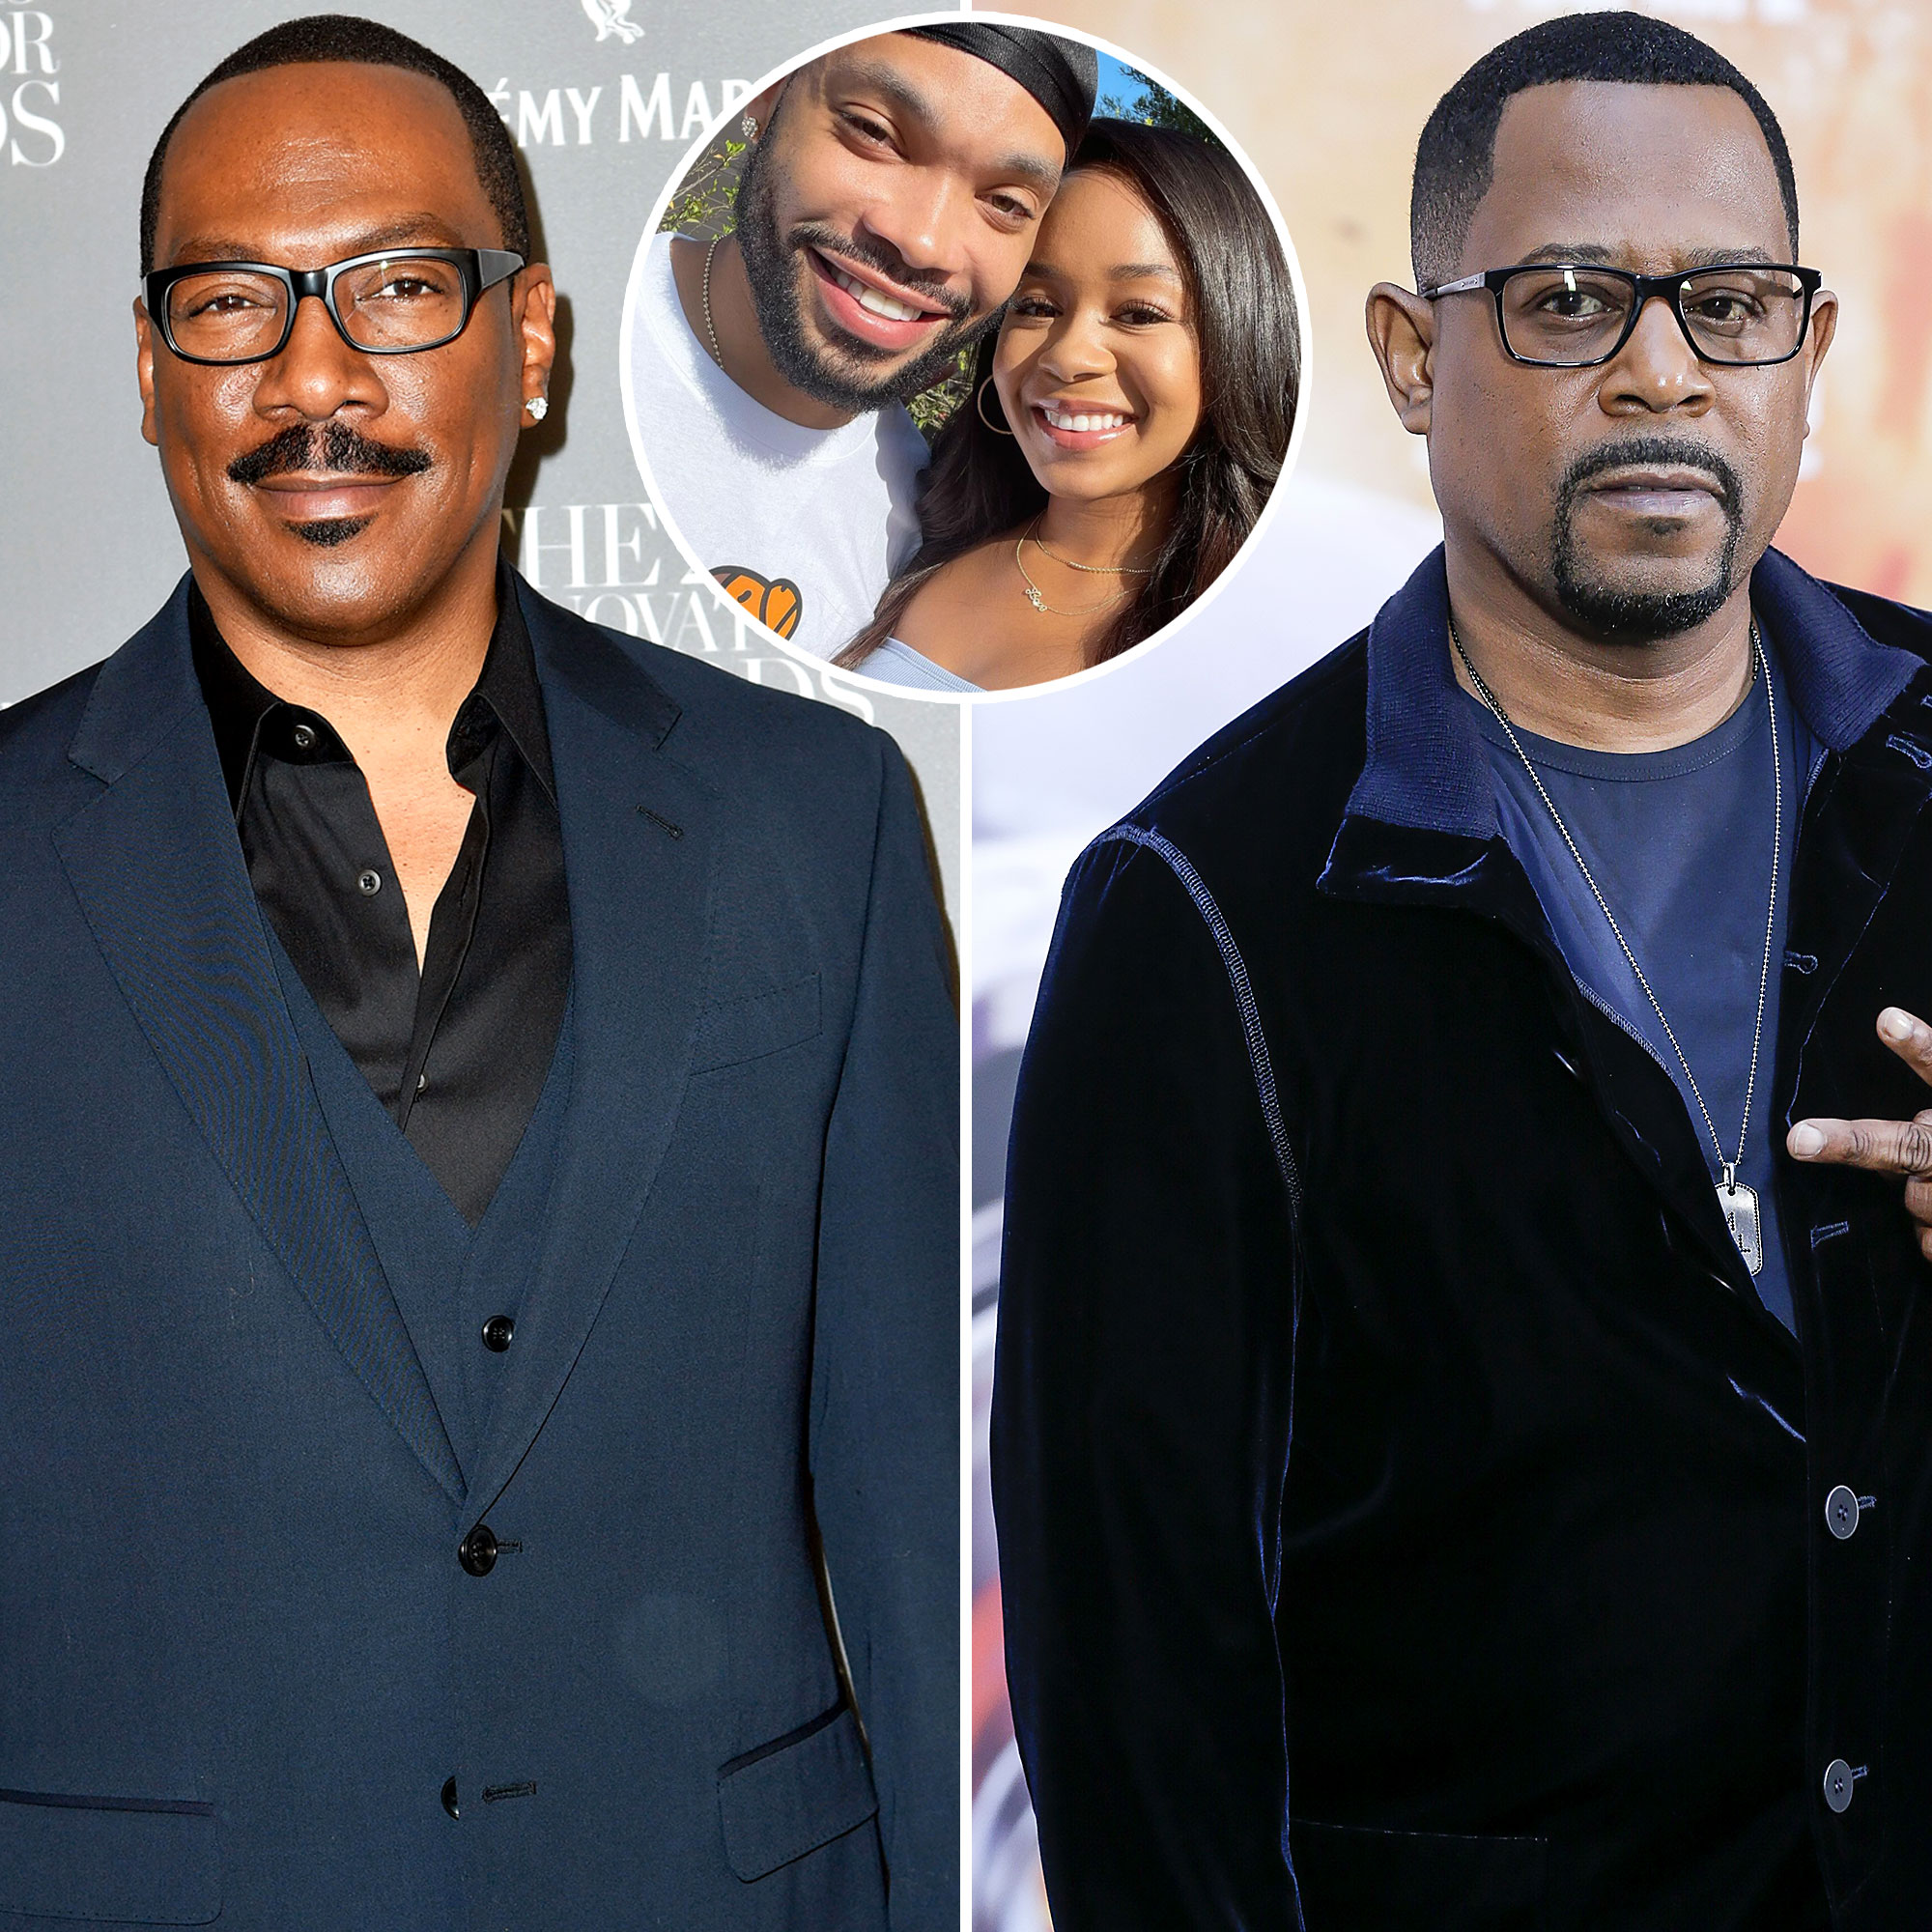 Eddie Murphy, Martin Lawrences Kids Are Dating picture pic